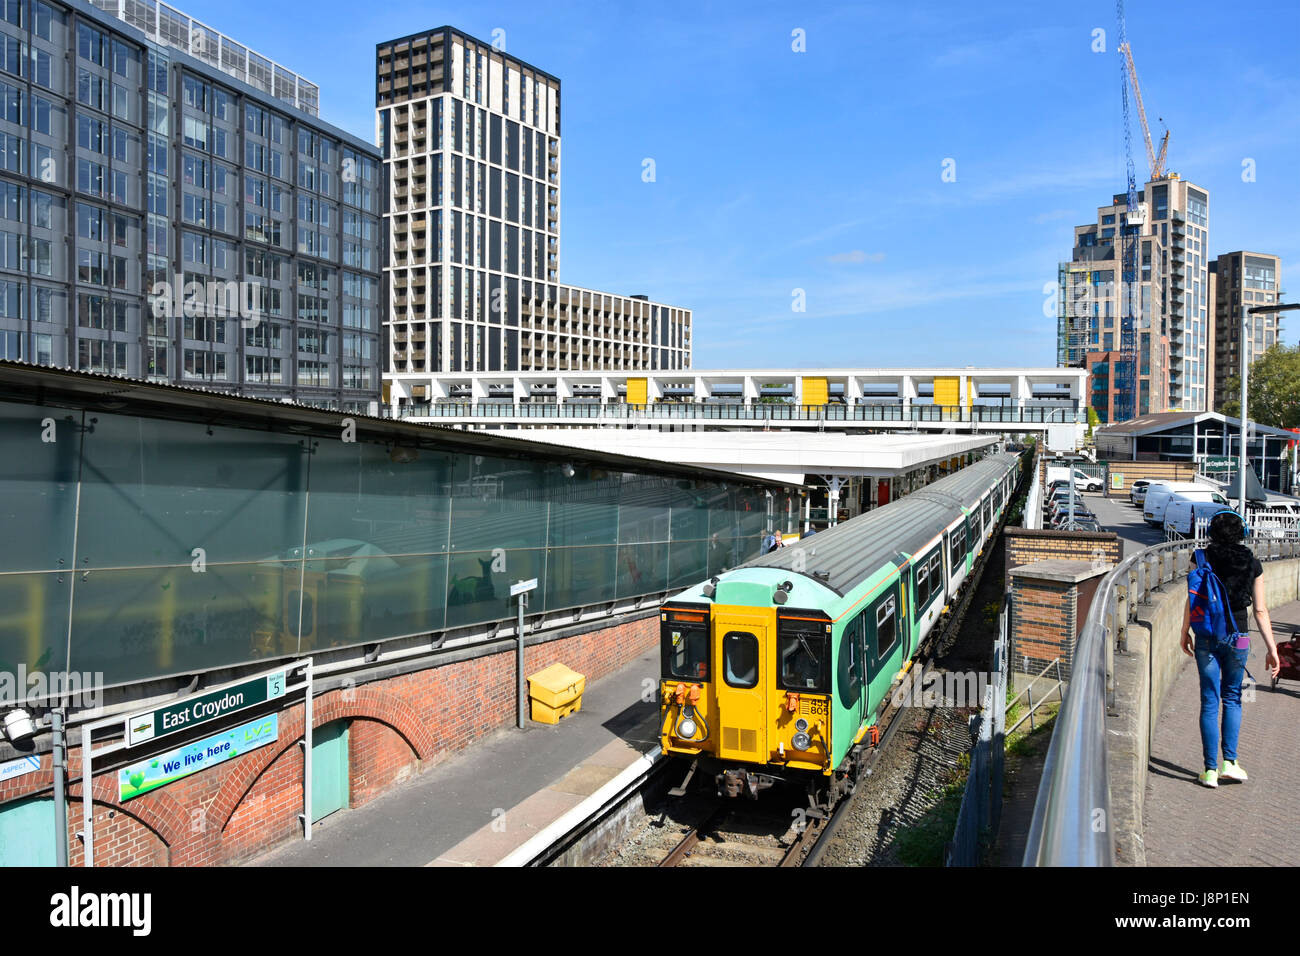 Development of new office blocks & apartment towers nearing completion  & under construction around East Croydon train station South London England UK Stock Photo